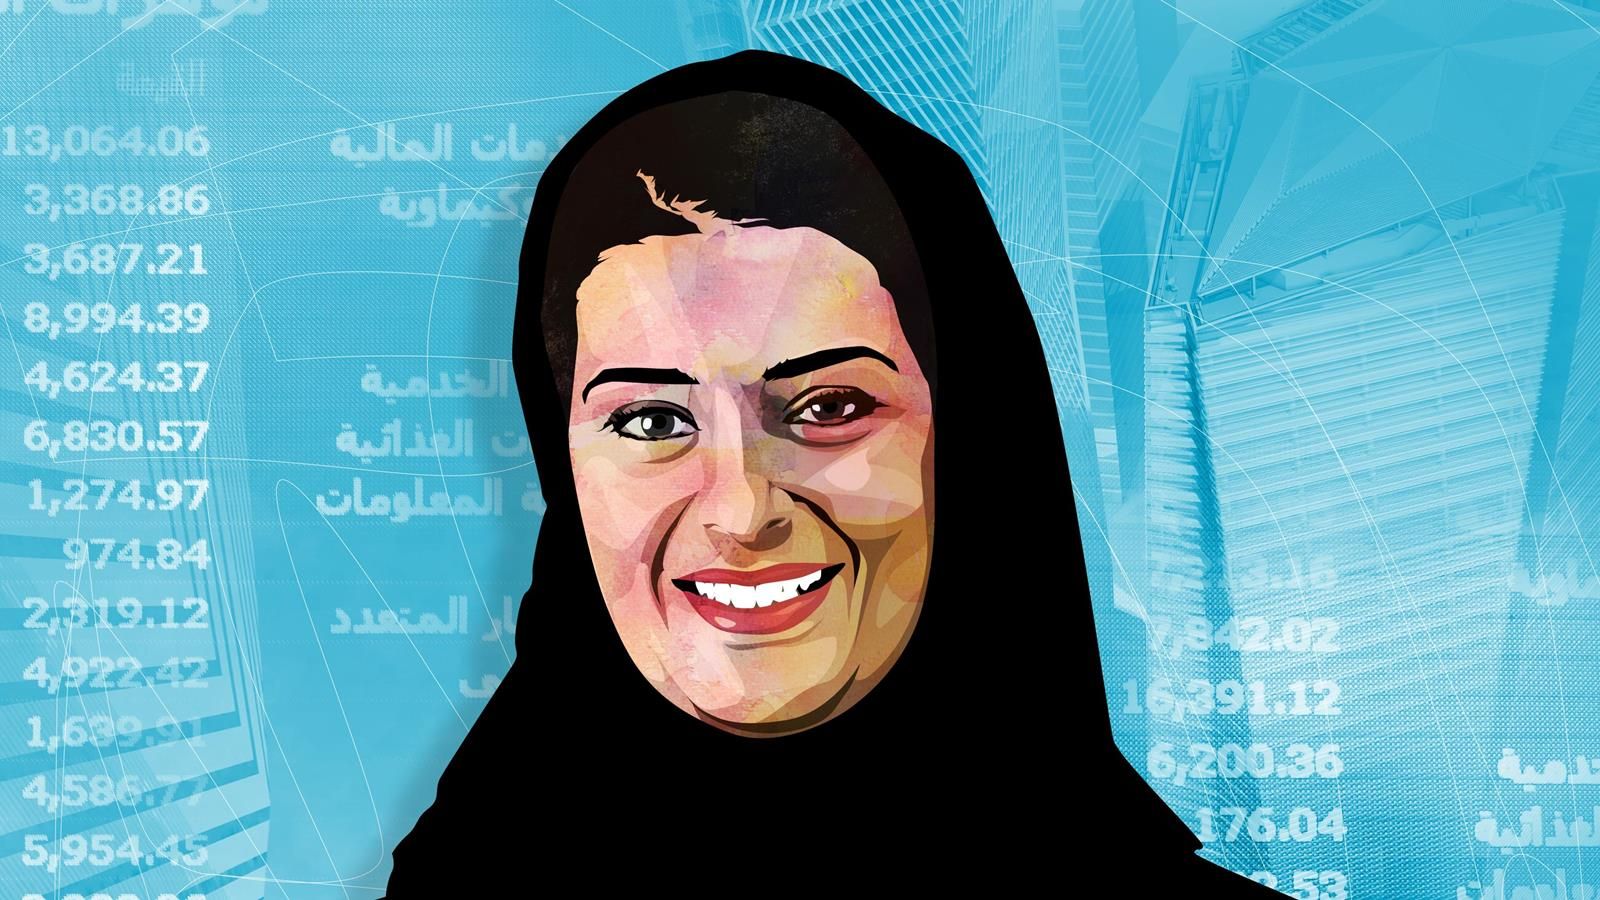 Sarah Al Suhaimi is the first and only woman to lead a bourse in the Middle East. Image by Alvaro Tapia Hidalgo.